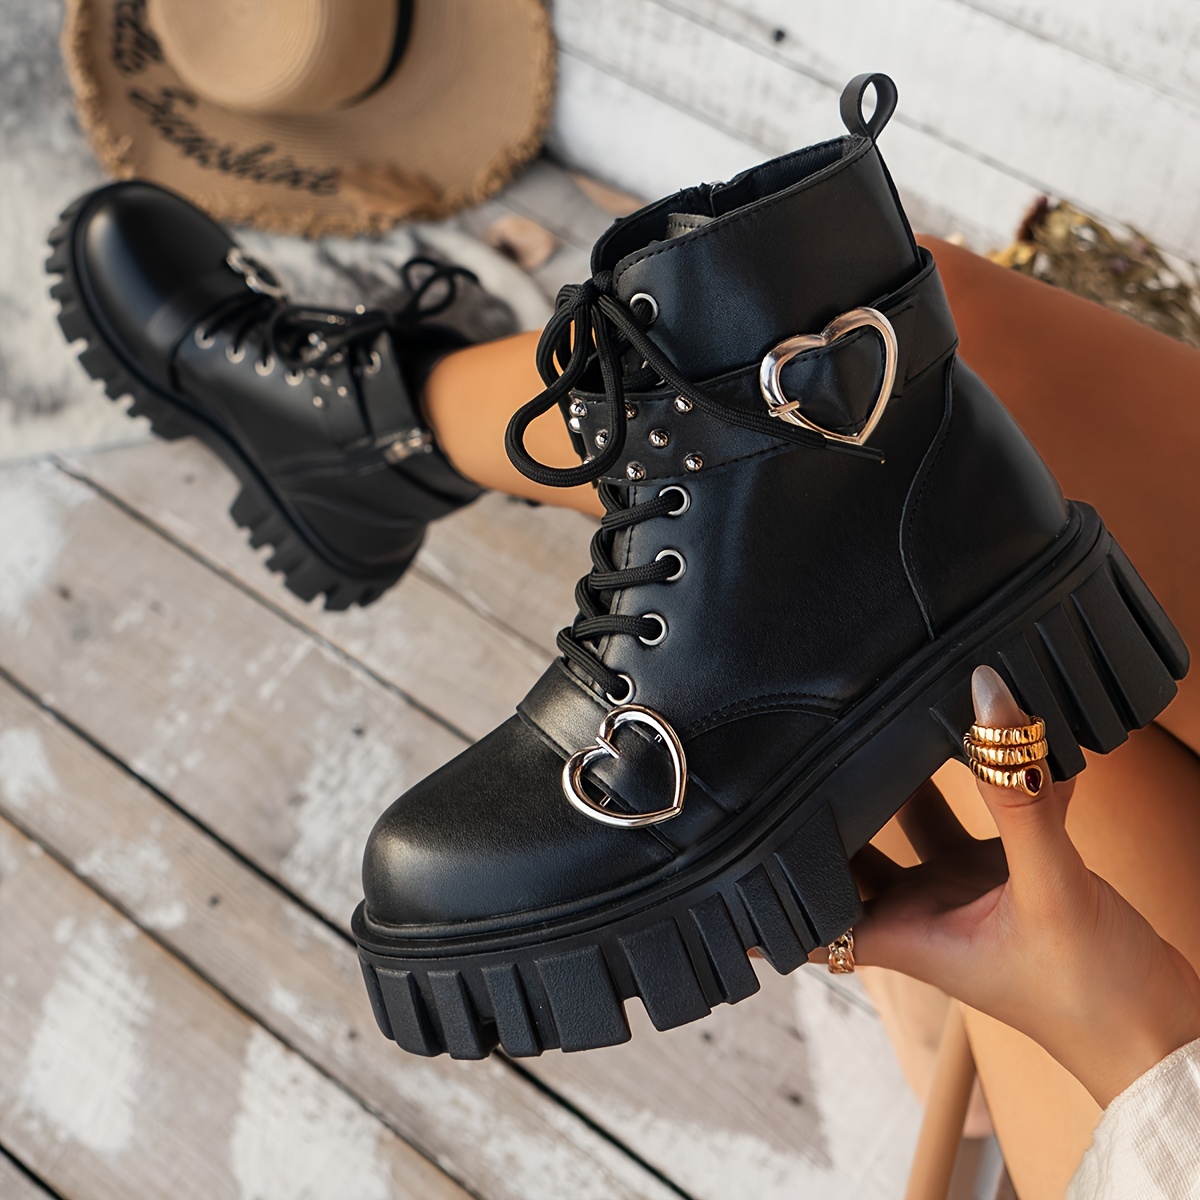 Women's Platform Gothic Ankle Boots, Heart Buckle Strap Lace Up